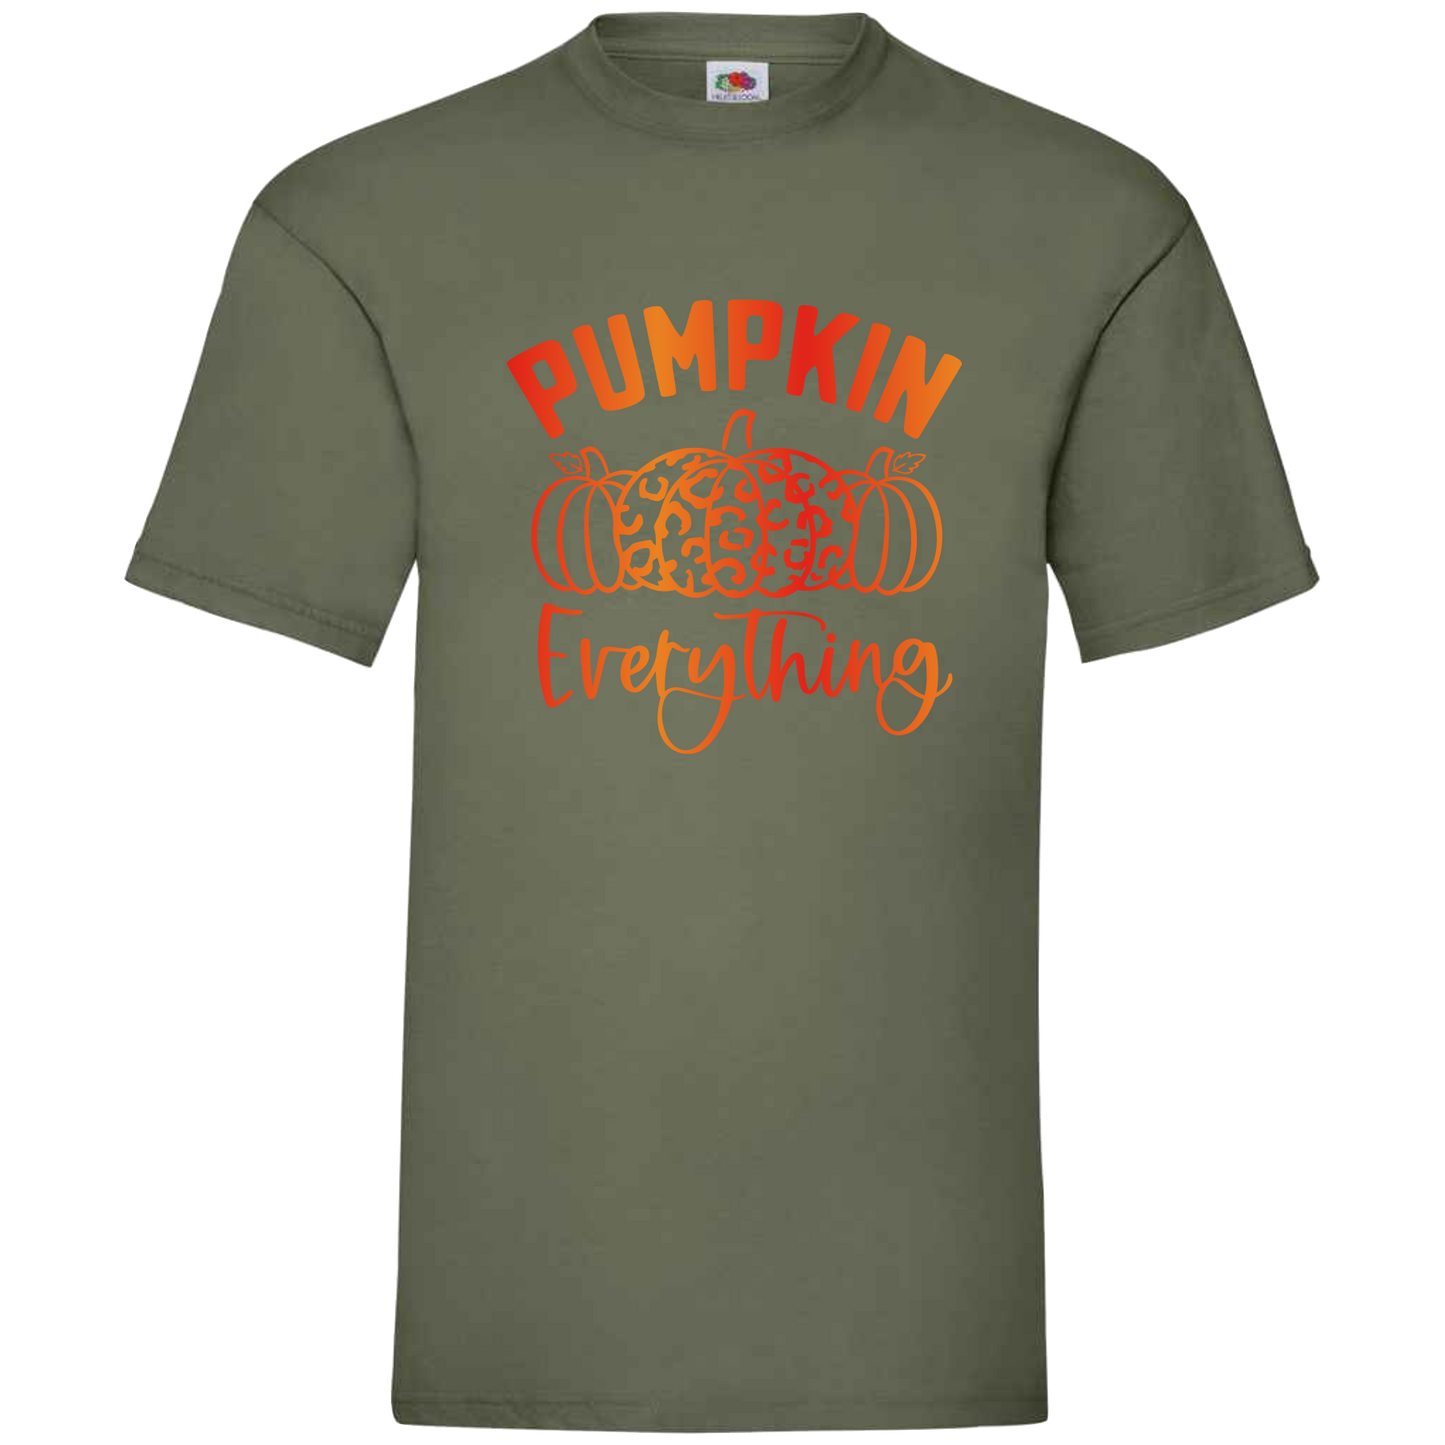 "Pumpkin Everything" T-shirt with Ombre Print